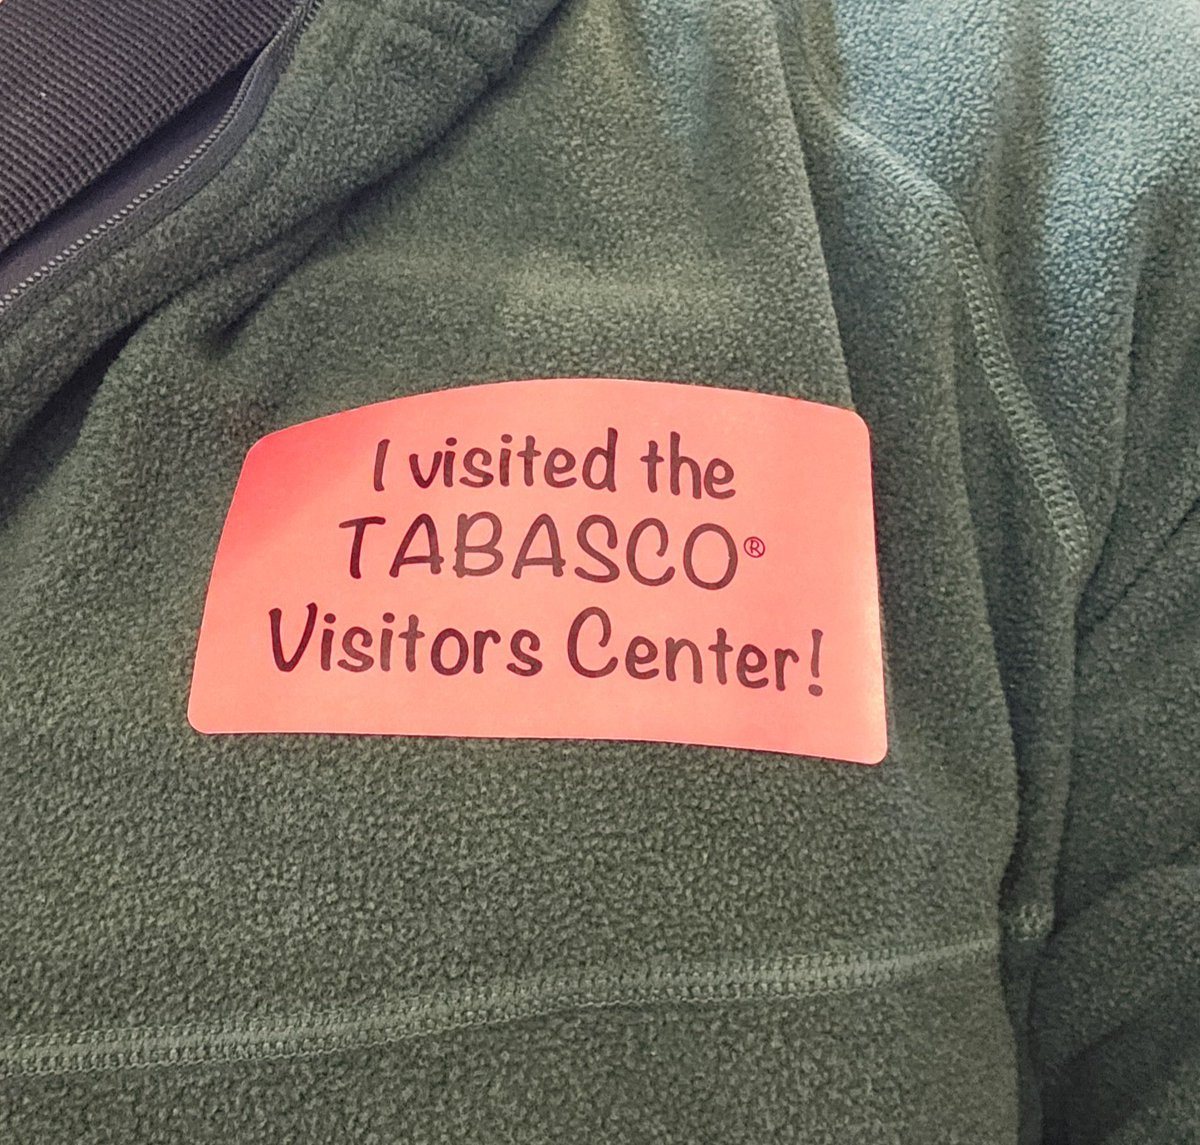 I remember sitting down at dinner with my wife looking at a bottle of @TABASCO in Cwmbran, S. Wales and wondered 'Where's it made?'. Little did we know we'd be visiting its home on #AveryIsland, #Louisiana a year later.